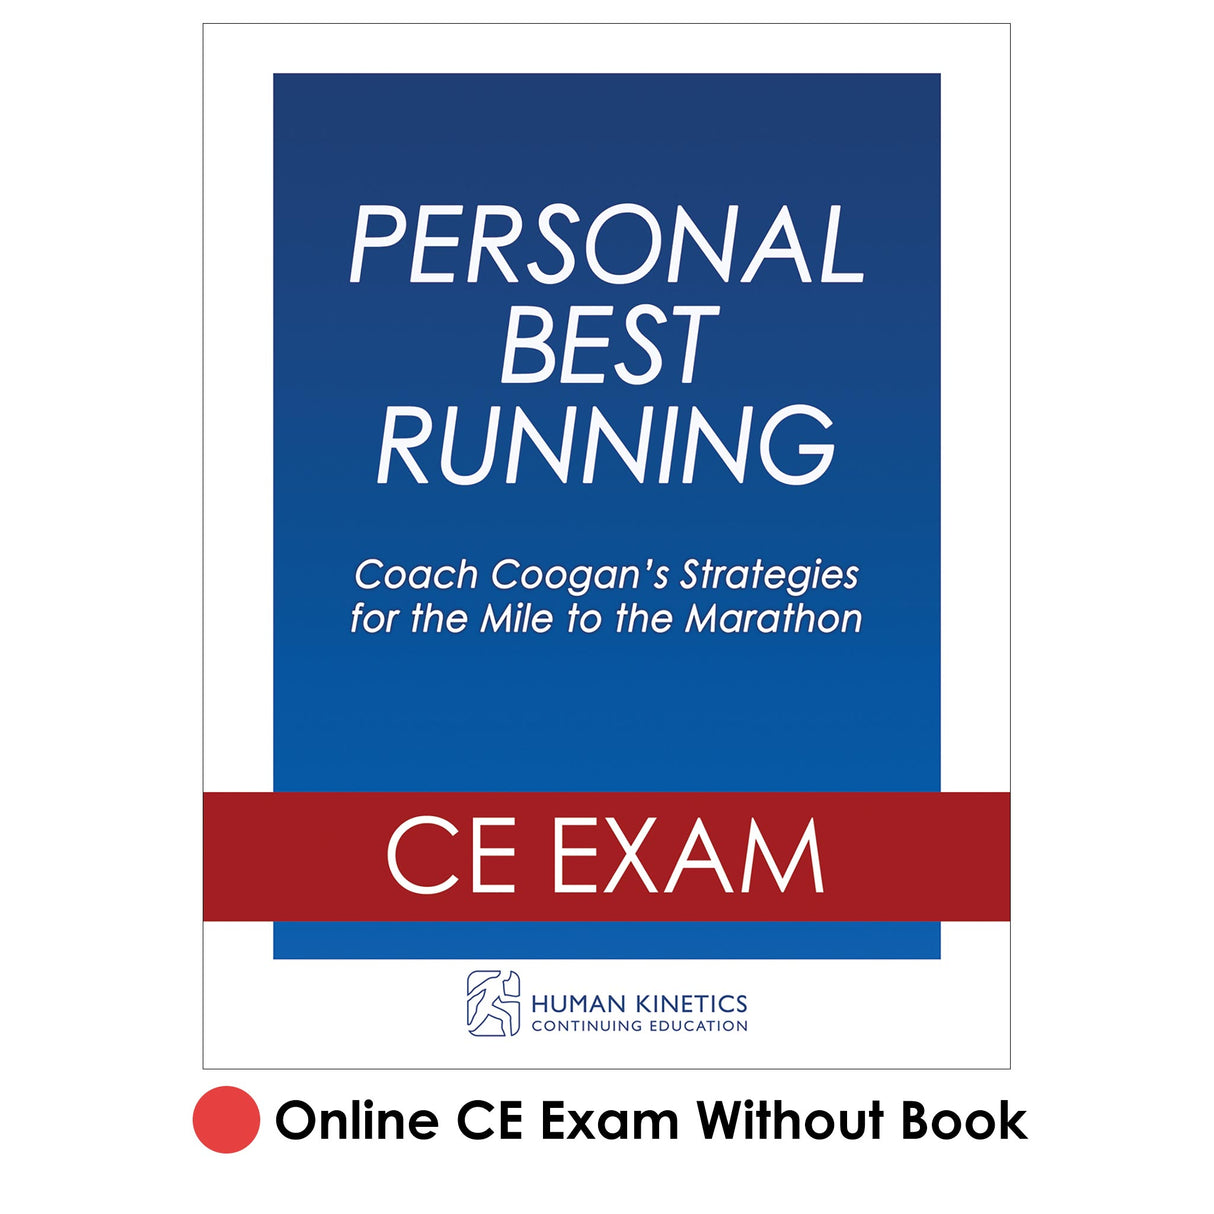 Personal Best Running Online CE Exam Without Book